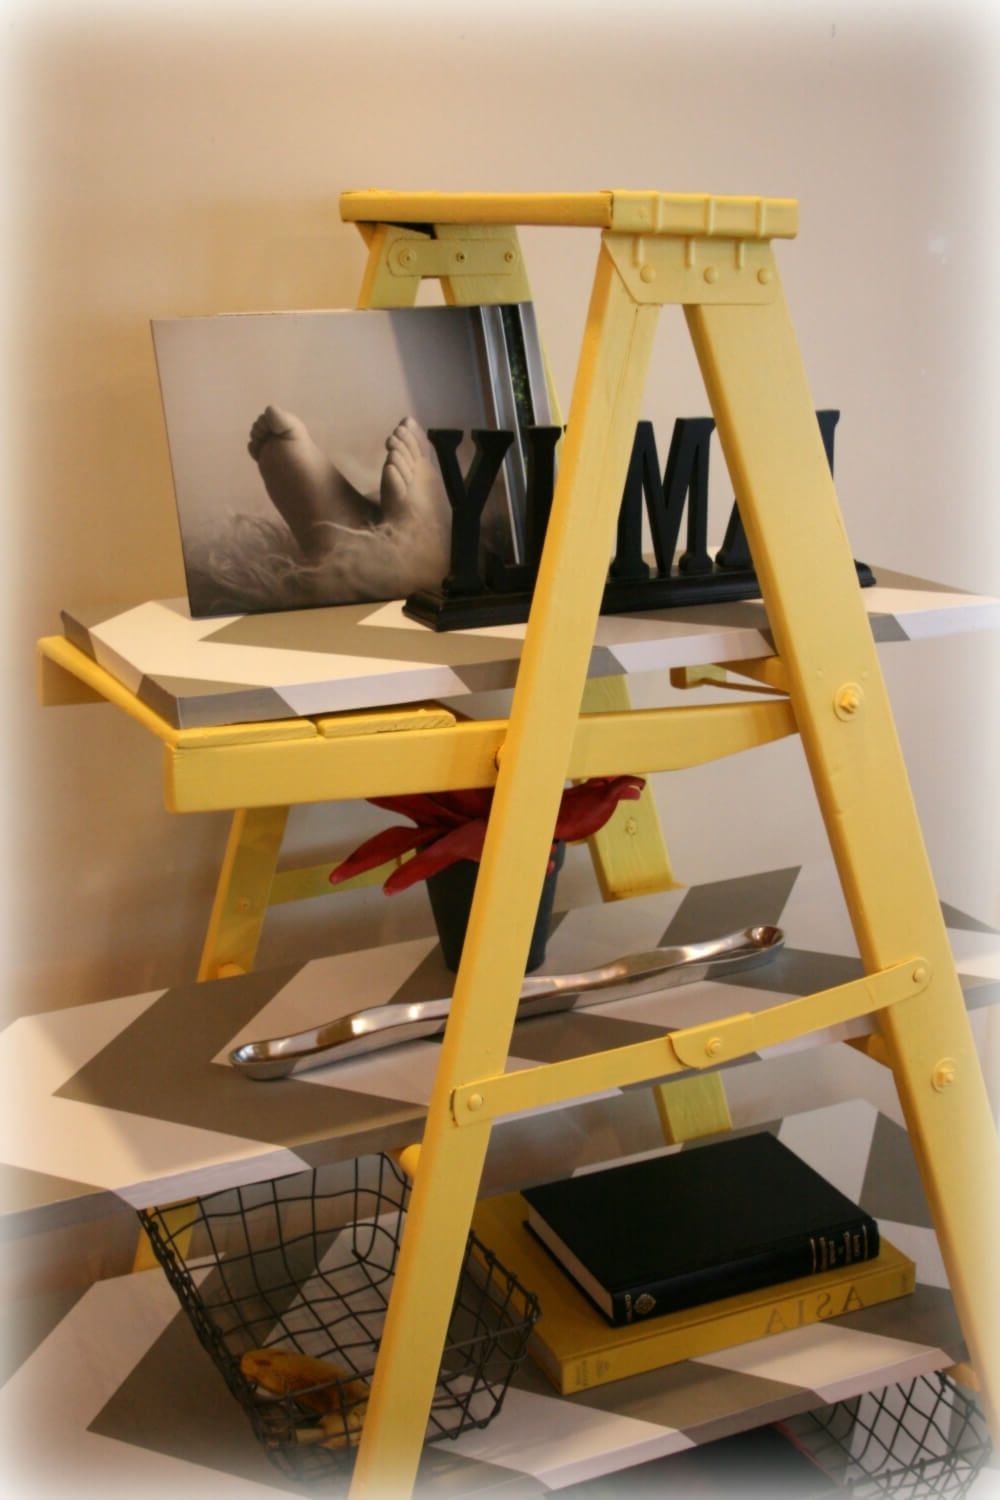 Favorite Handmade Wooden Shelves Within 11 Leaning Ladder Shelf Ideas (including 5 Handmade Versions) (View 6 of 15)